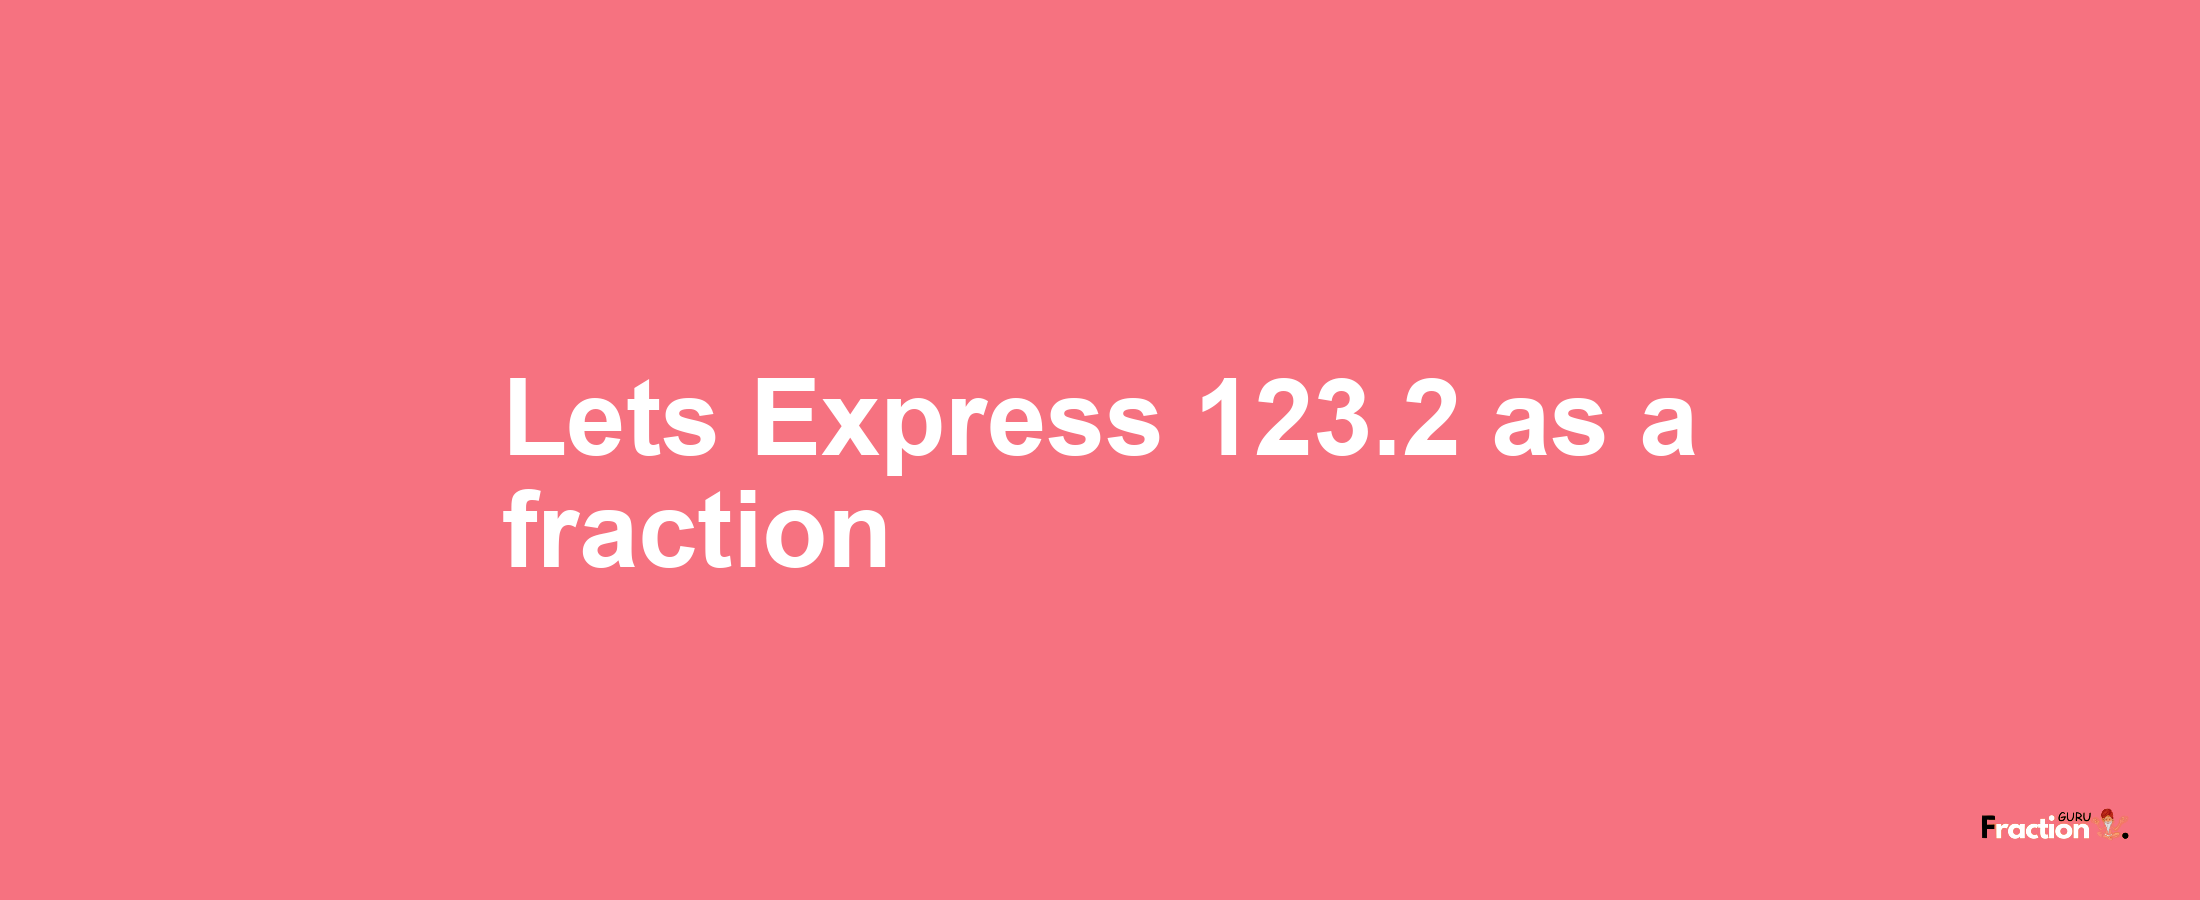 Lets Express 123.2 as afraction